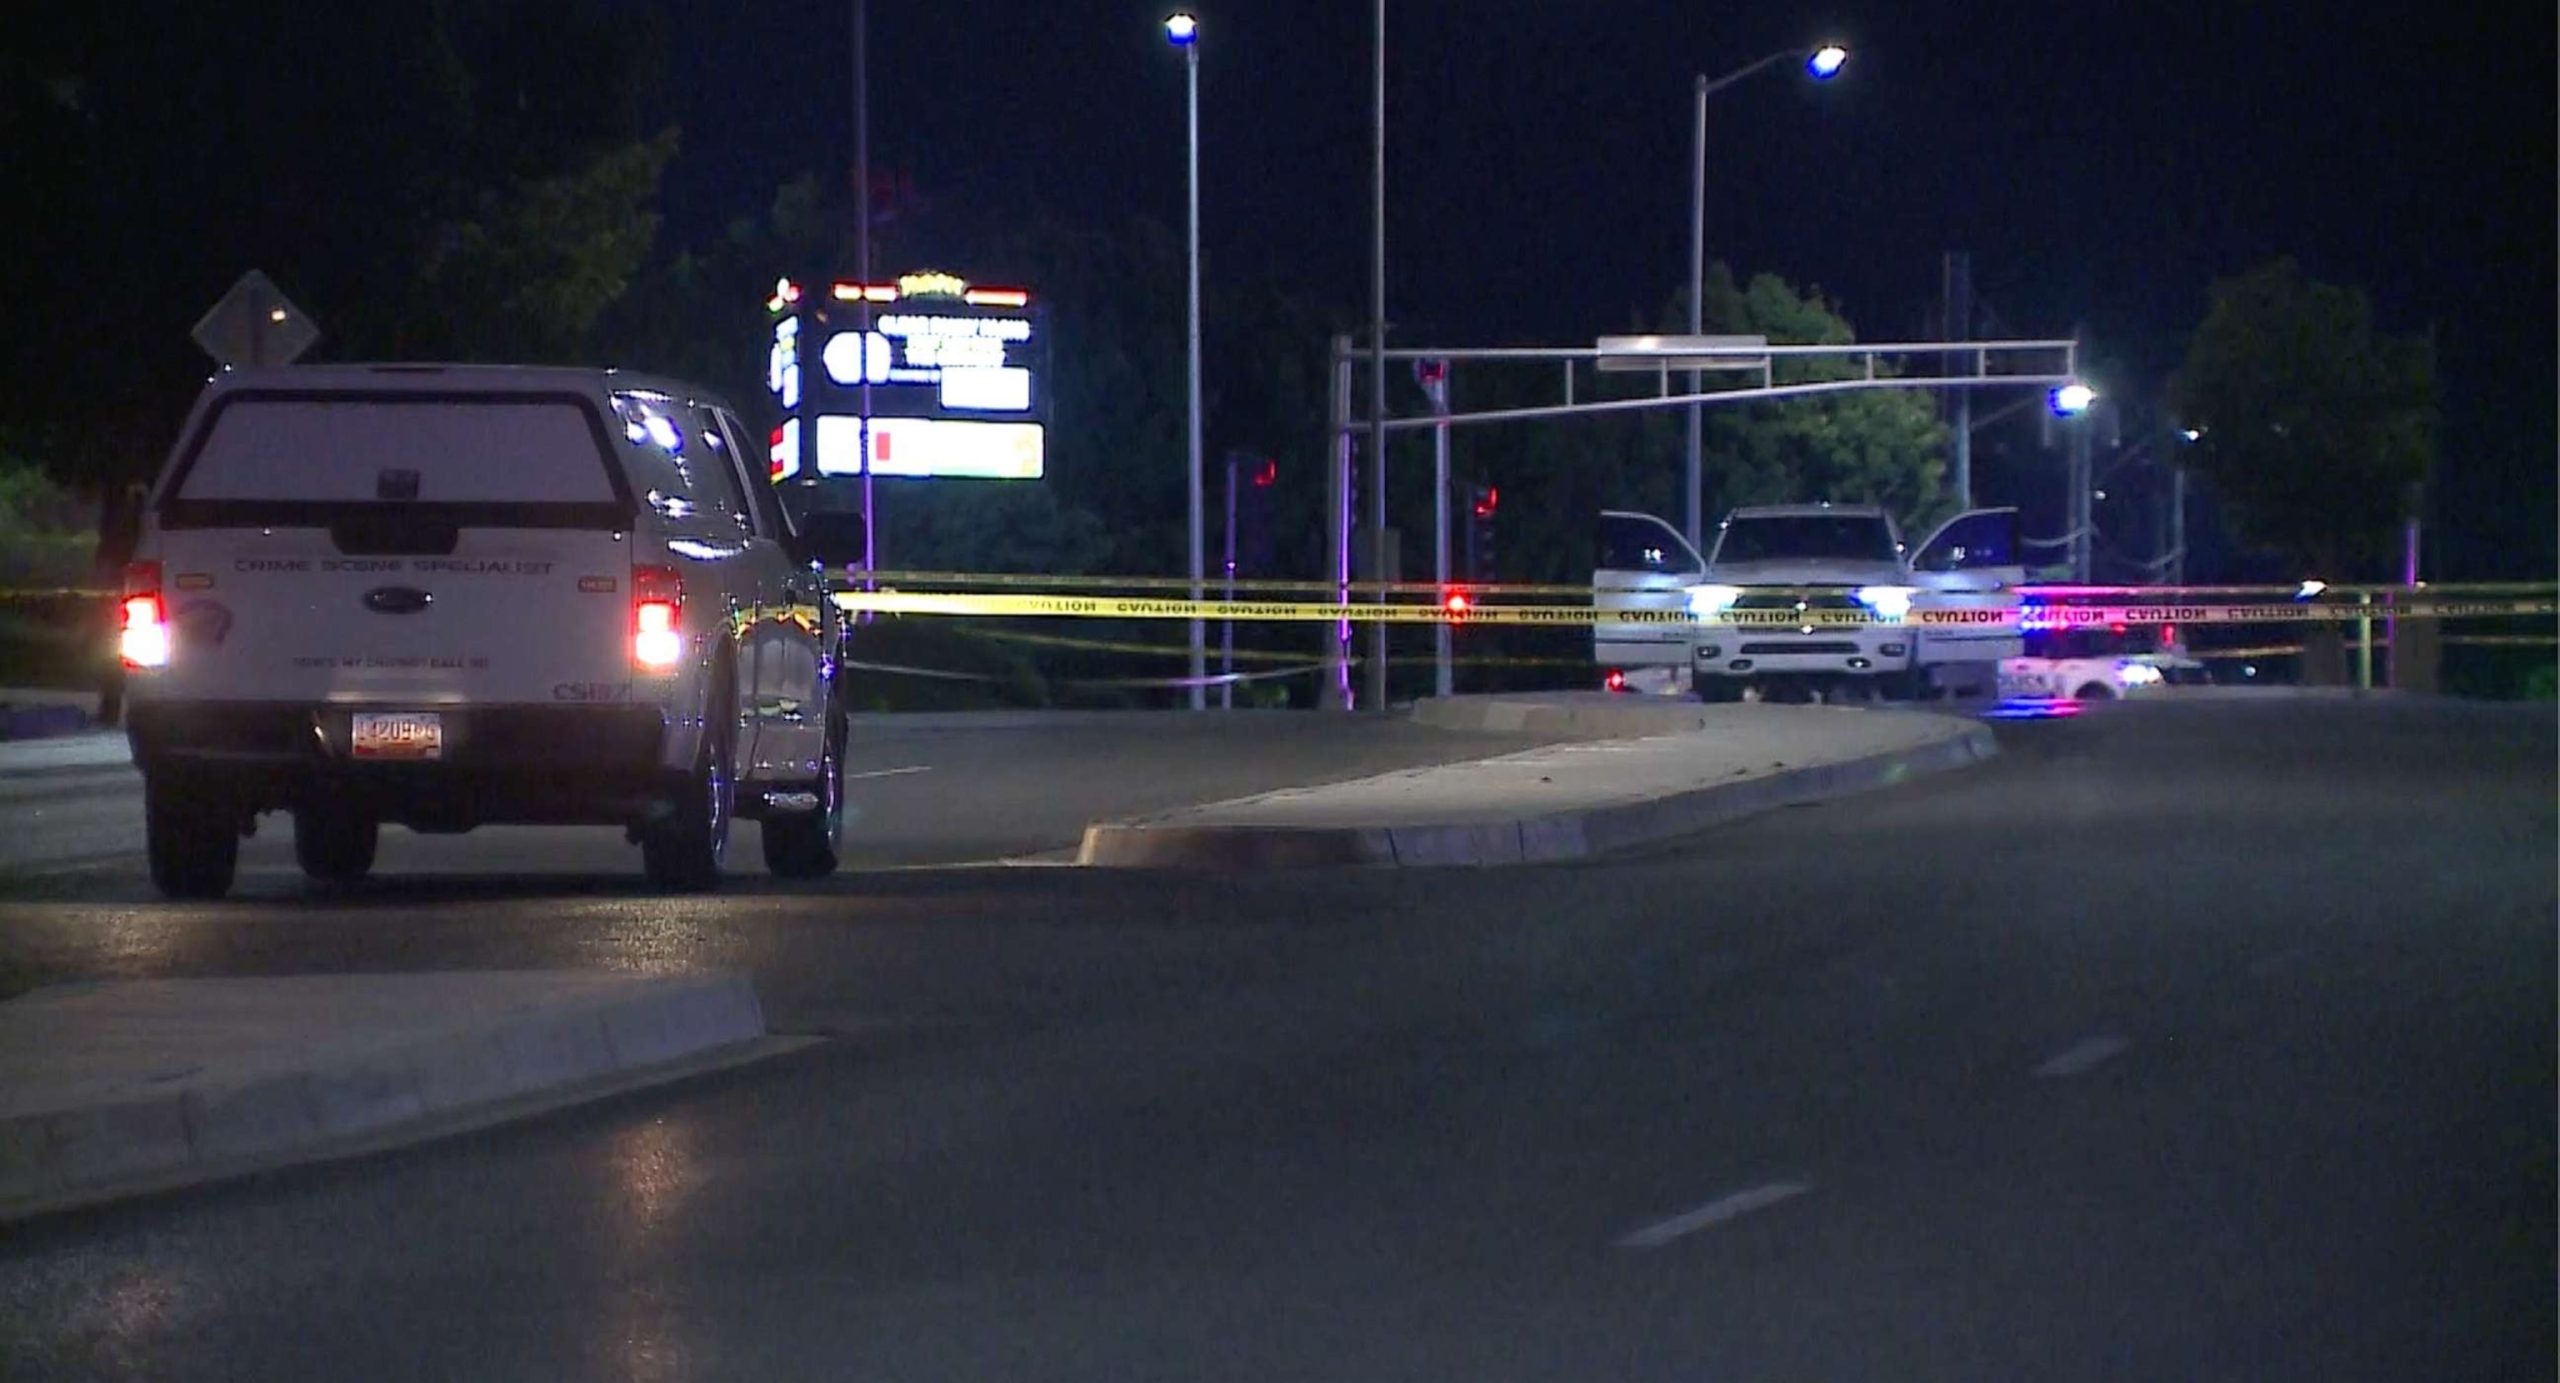 Tragic Incident in Albuquerque: 11-Year-Old Fatally Shot and Woman Injured in Car